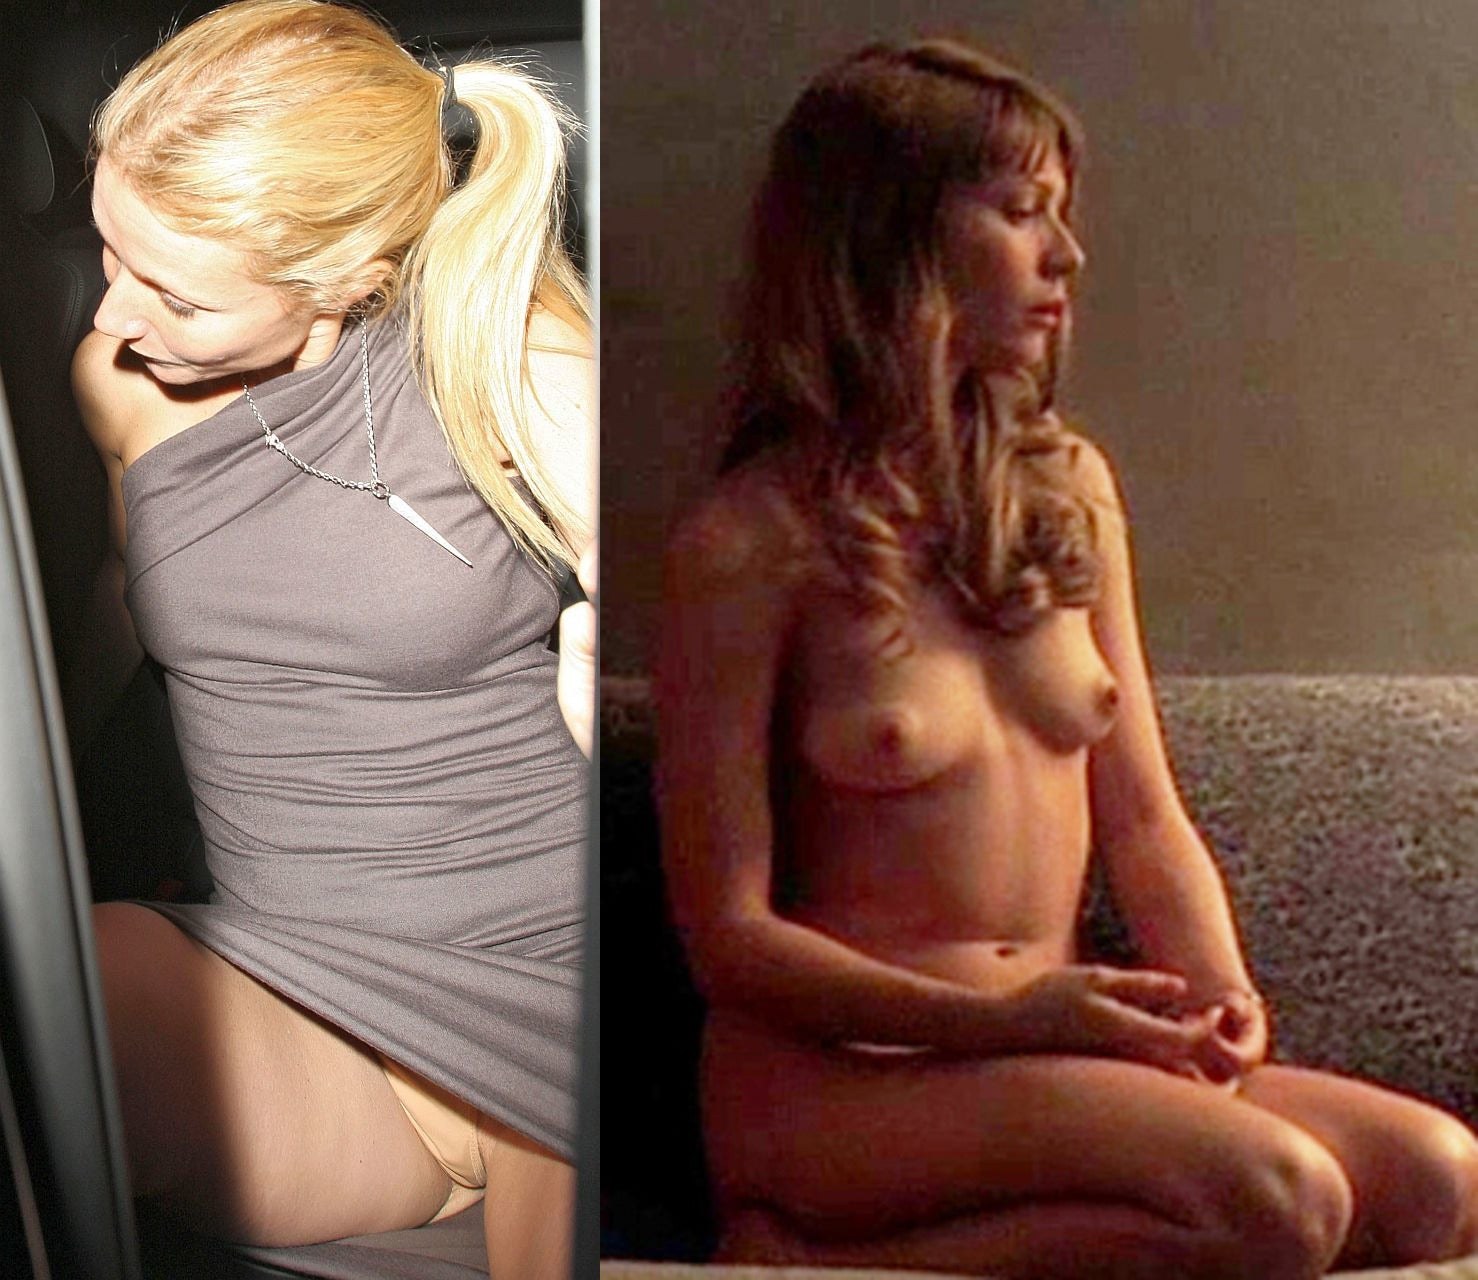 Gwyneth paltrow nude pictures